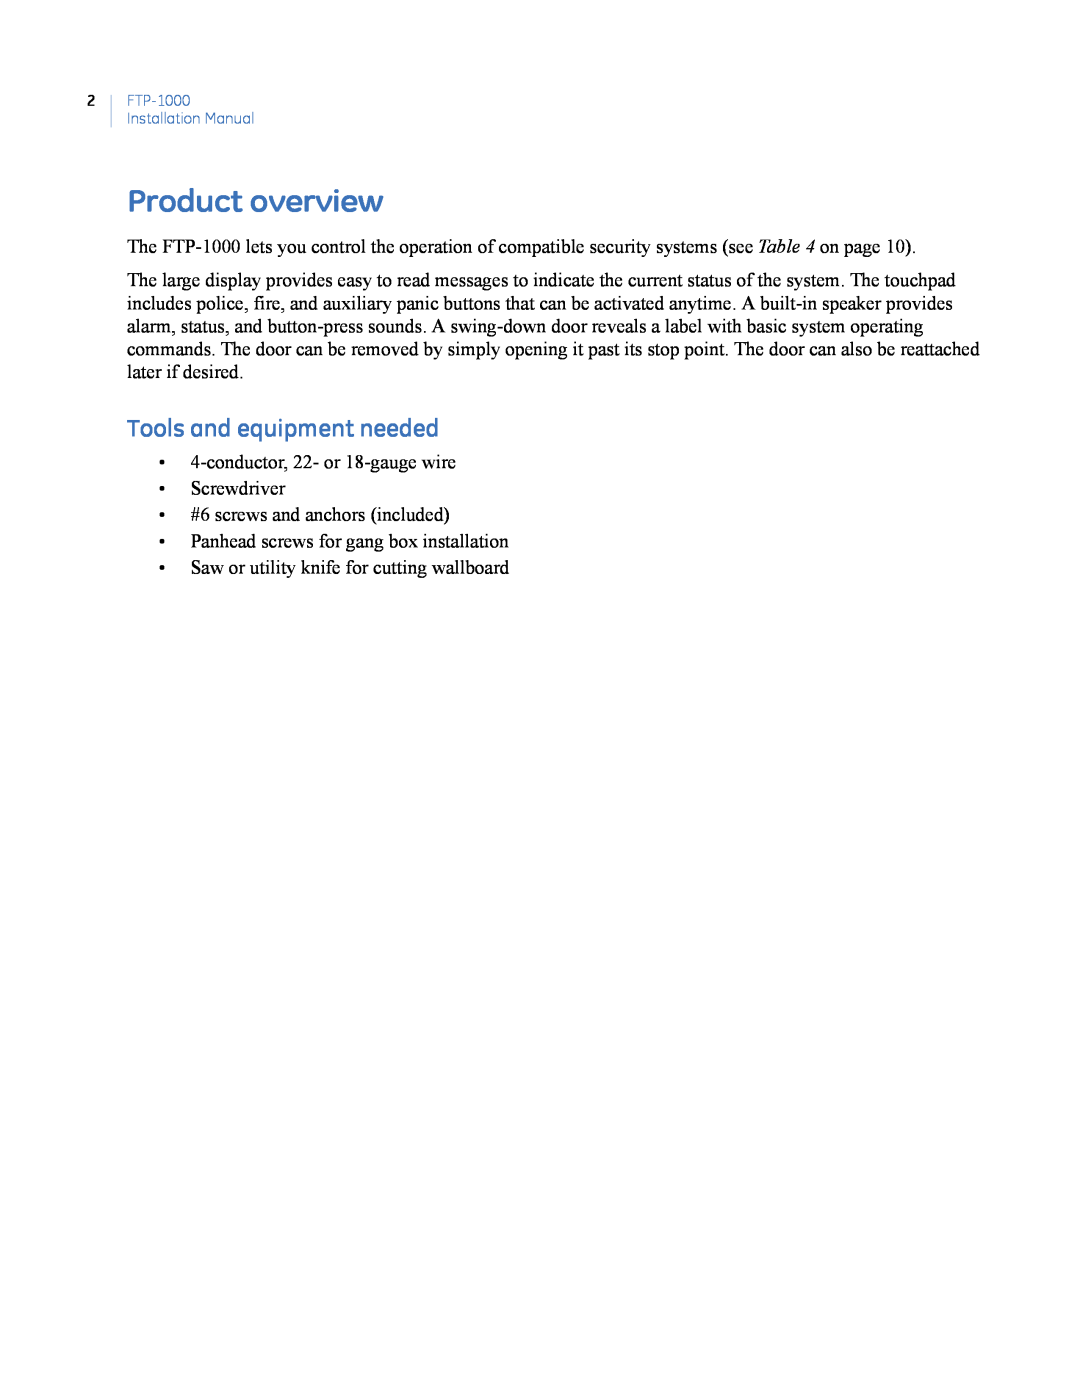 GE FTP-1000 installation manual Product overview, Tools and equipment needed 